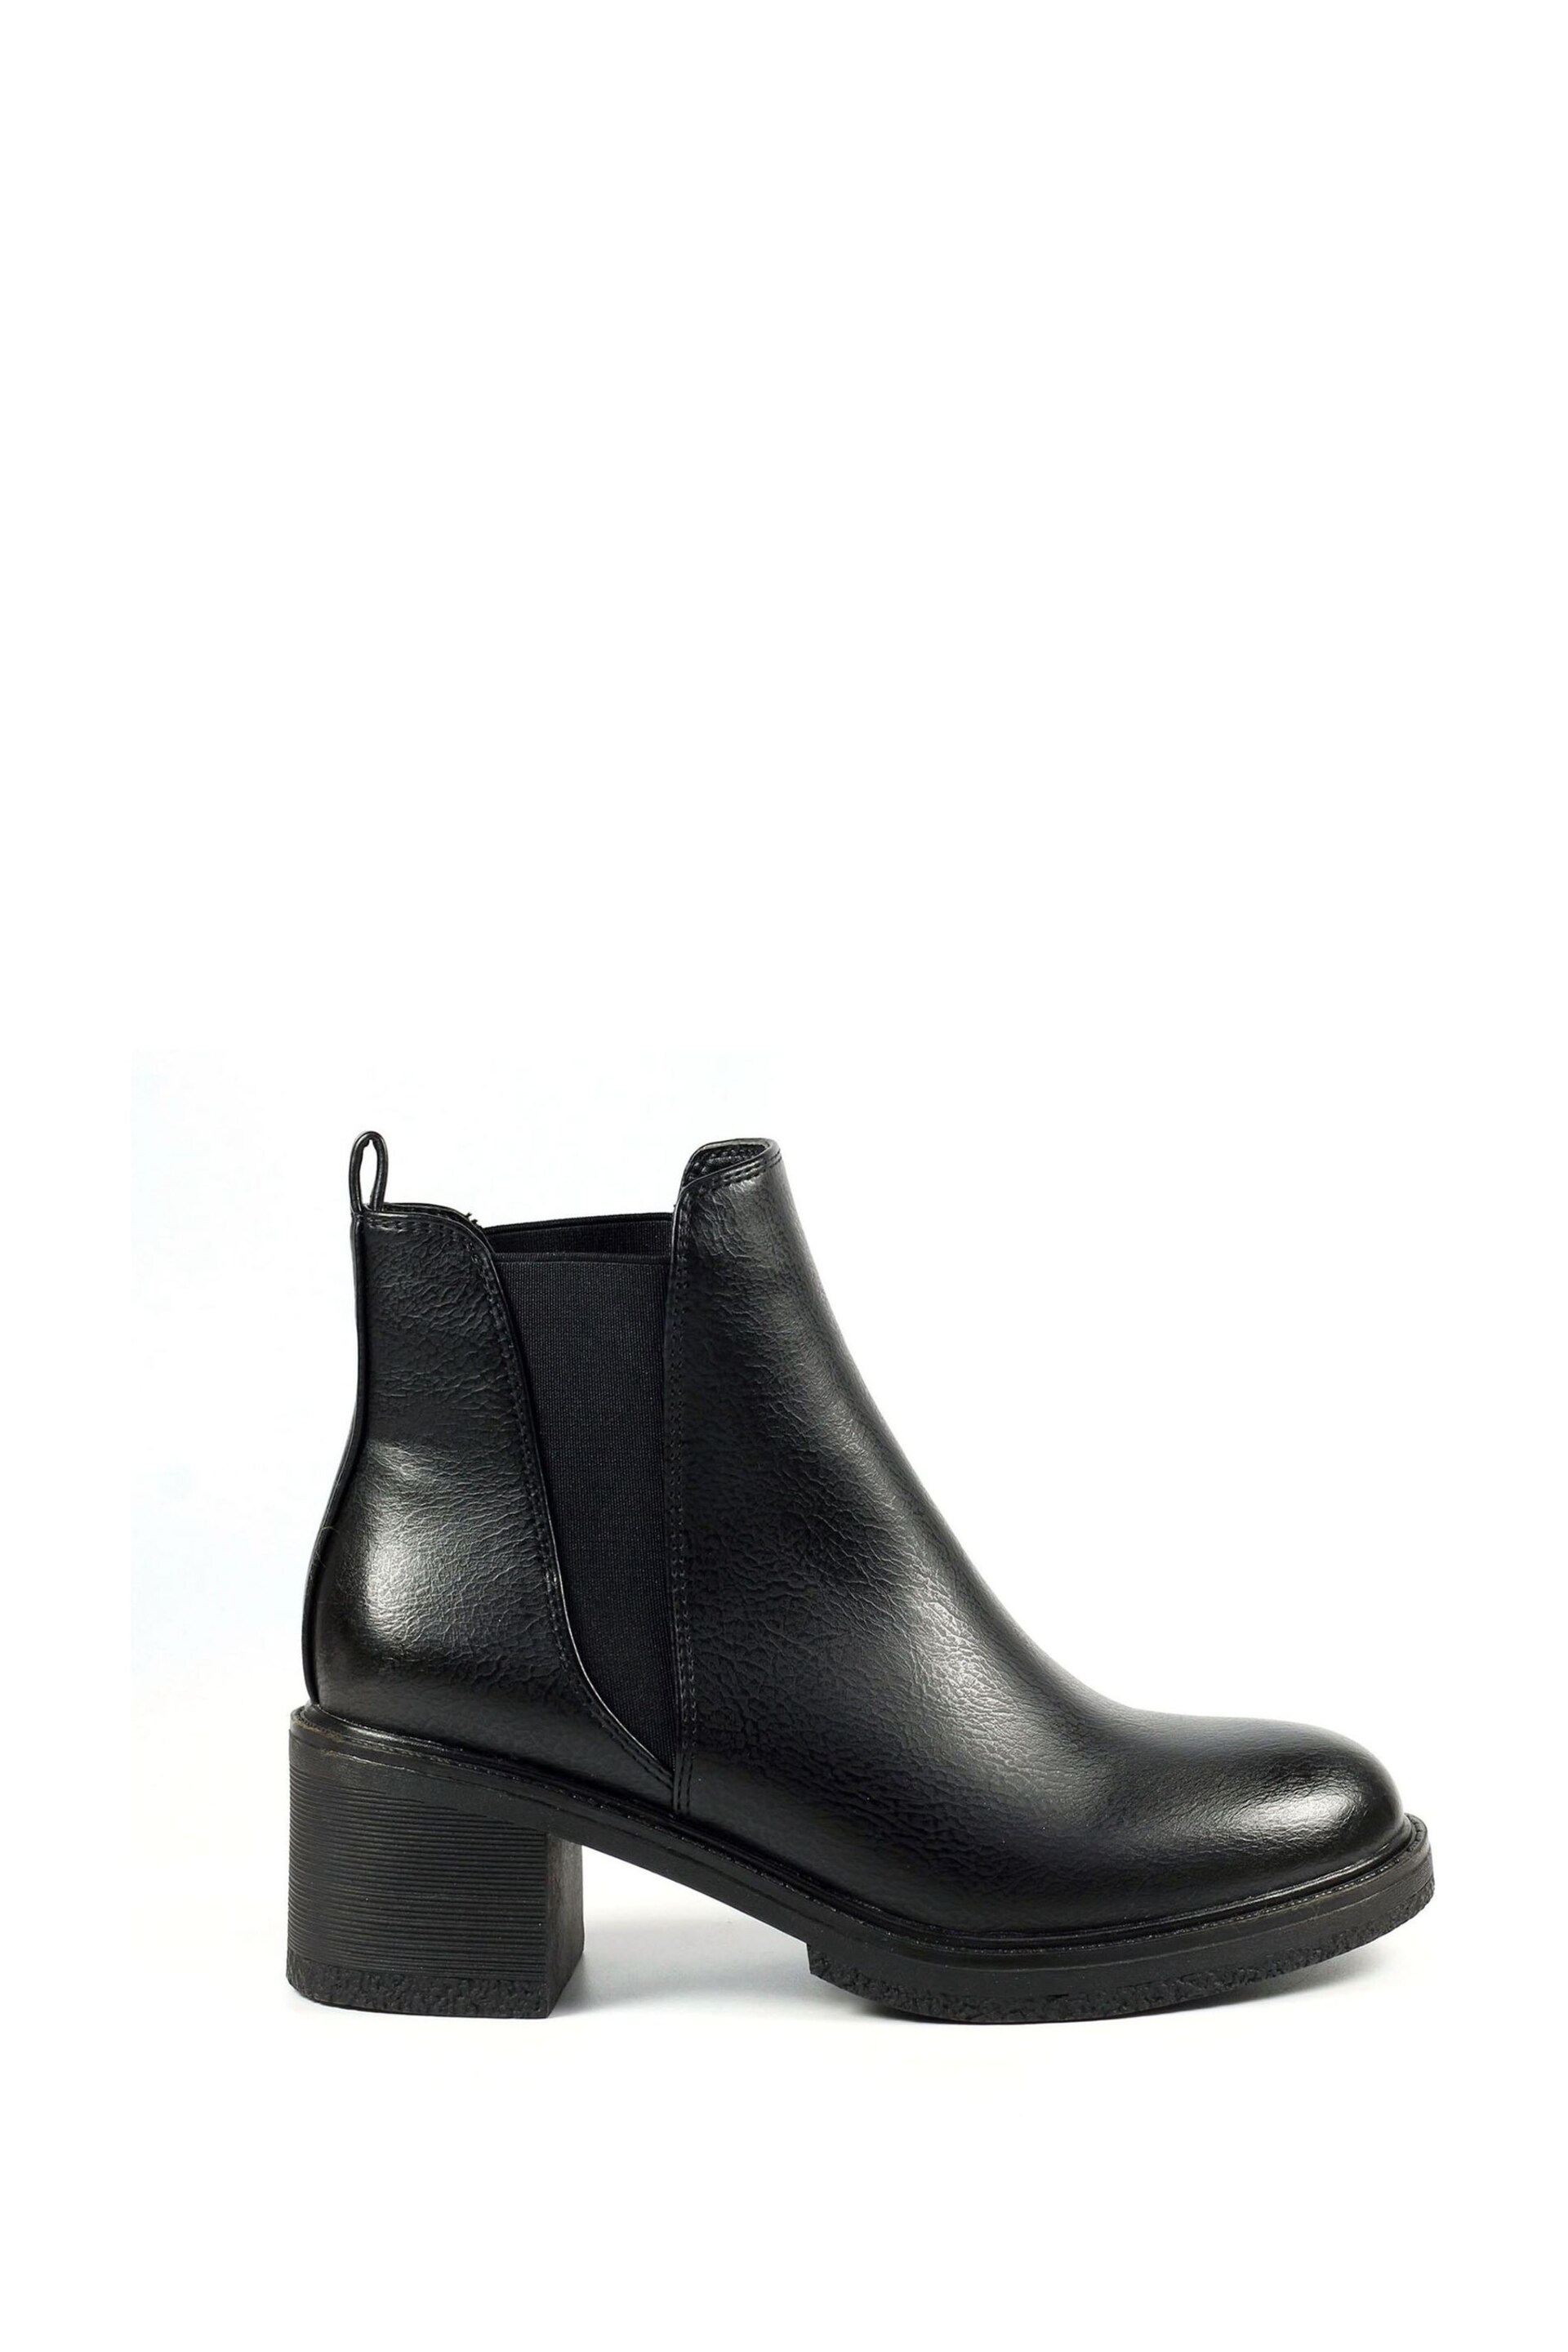 Lunar Ophelia Block Heel Ankle Boots - Image 2 of 8